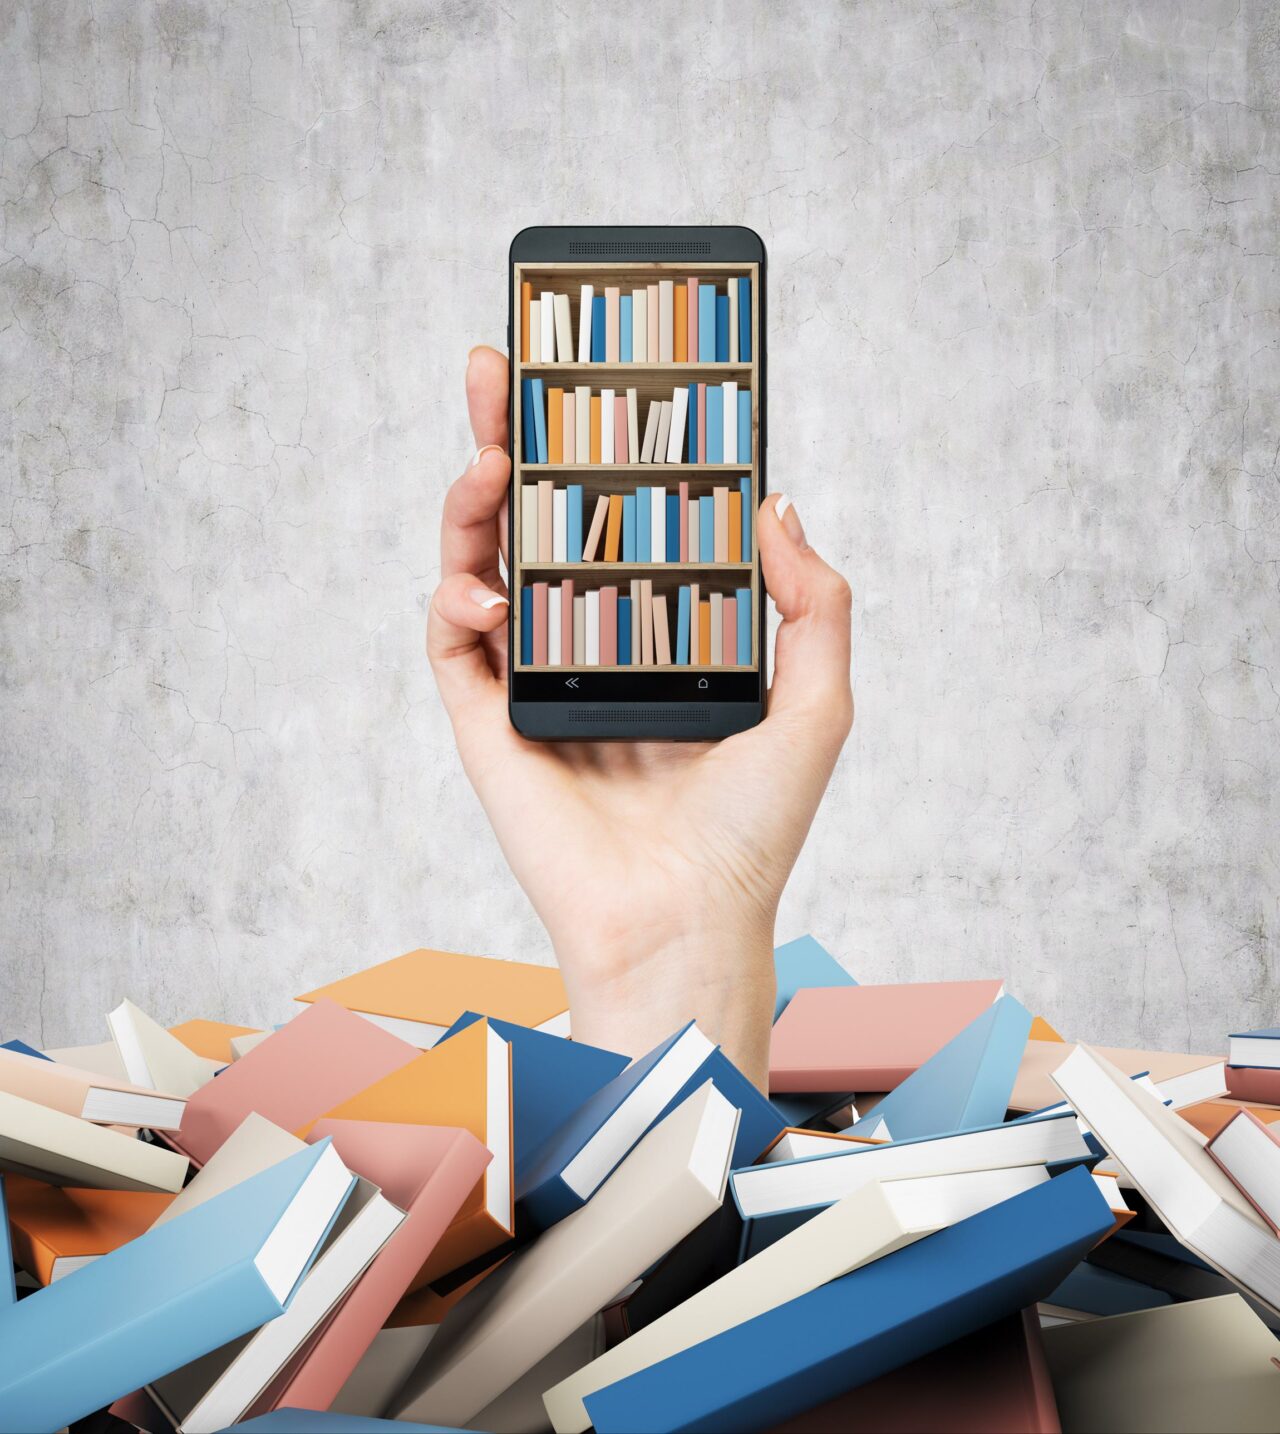 A hand holds a smartphone with a book shelf on the screen. A heap of colourful books. A concept of education and technology. Concrete wall background.